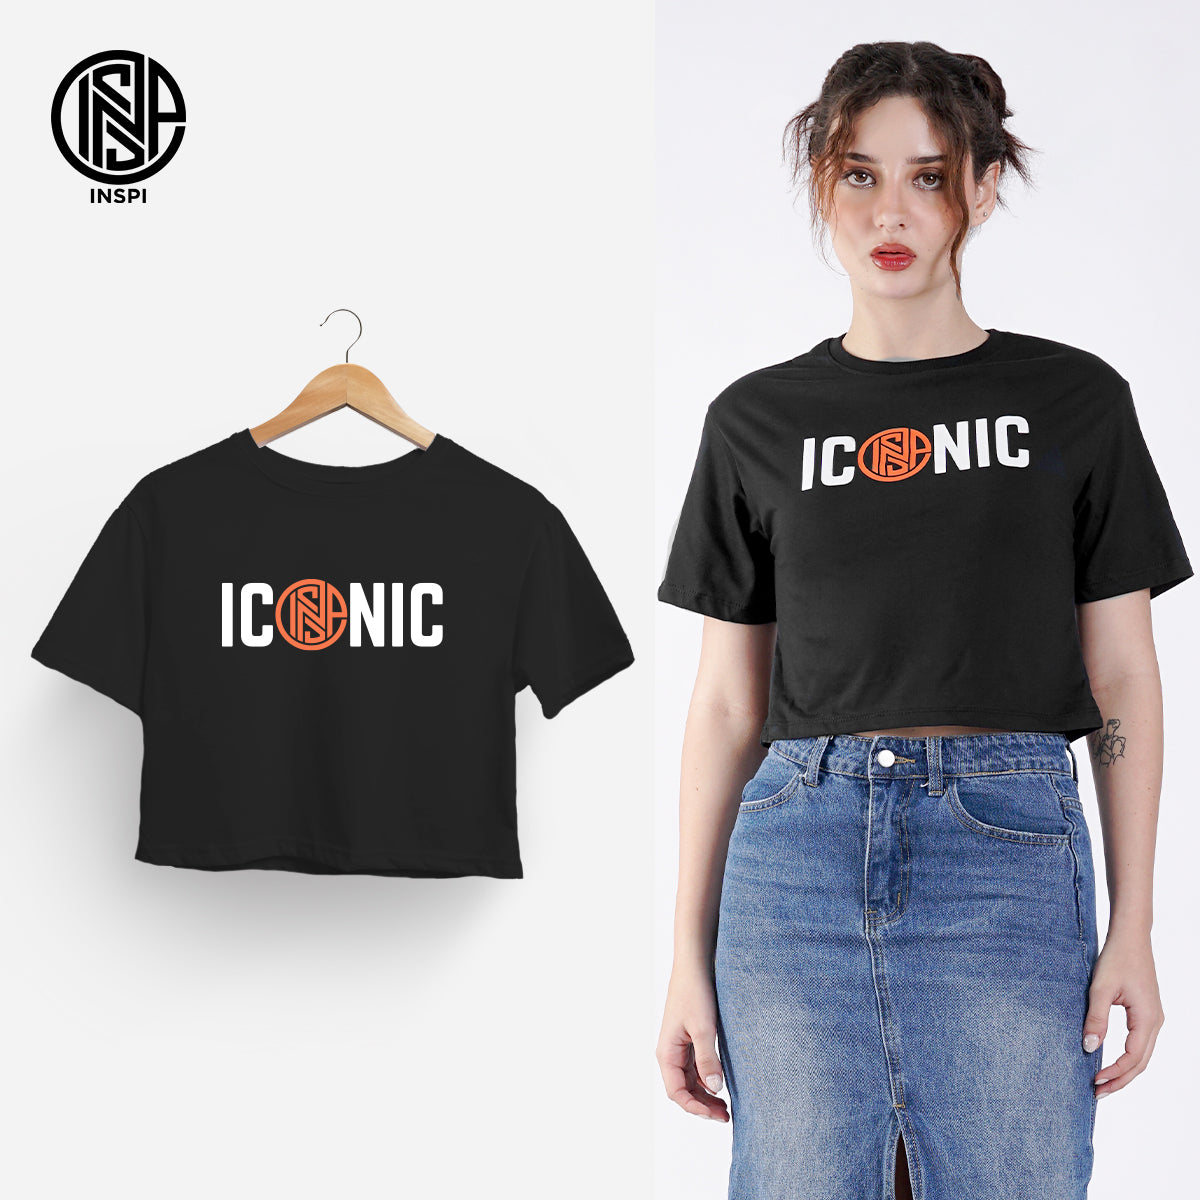 INSPI Originals Creators Crop Tops For Women Collection Statement Loose Fit Printed Round Neck Outfit Statements